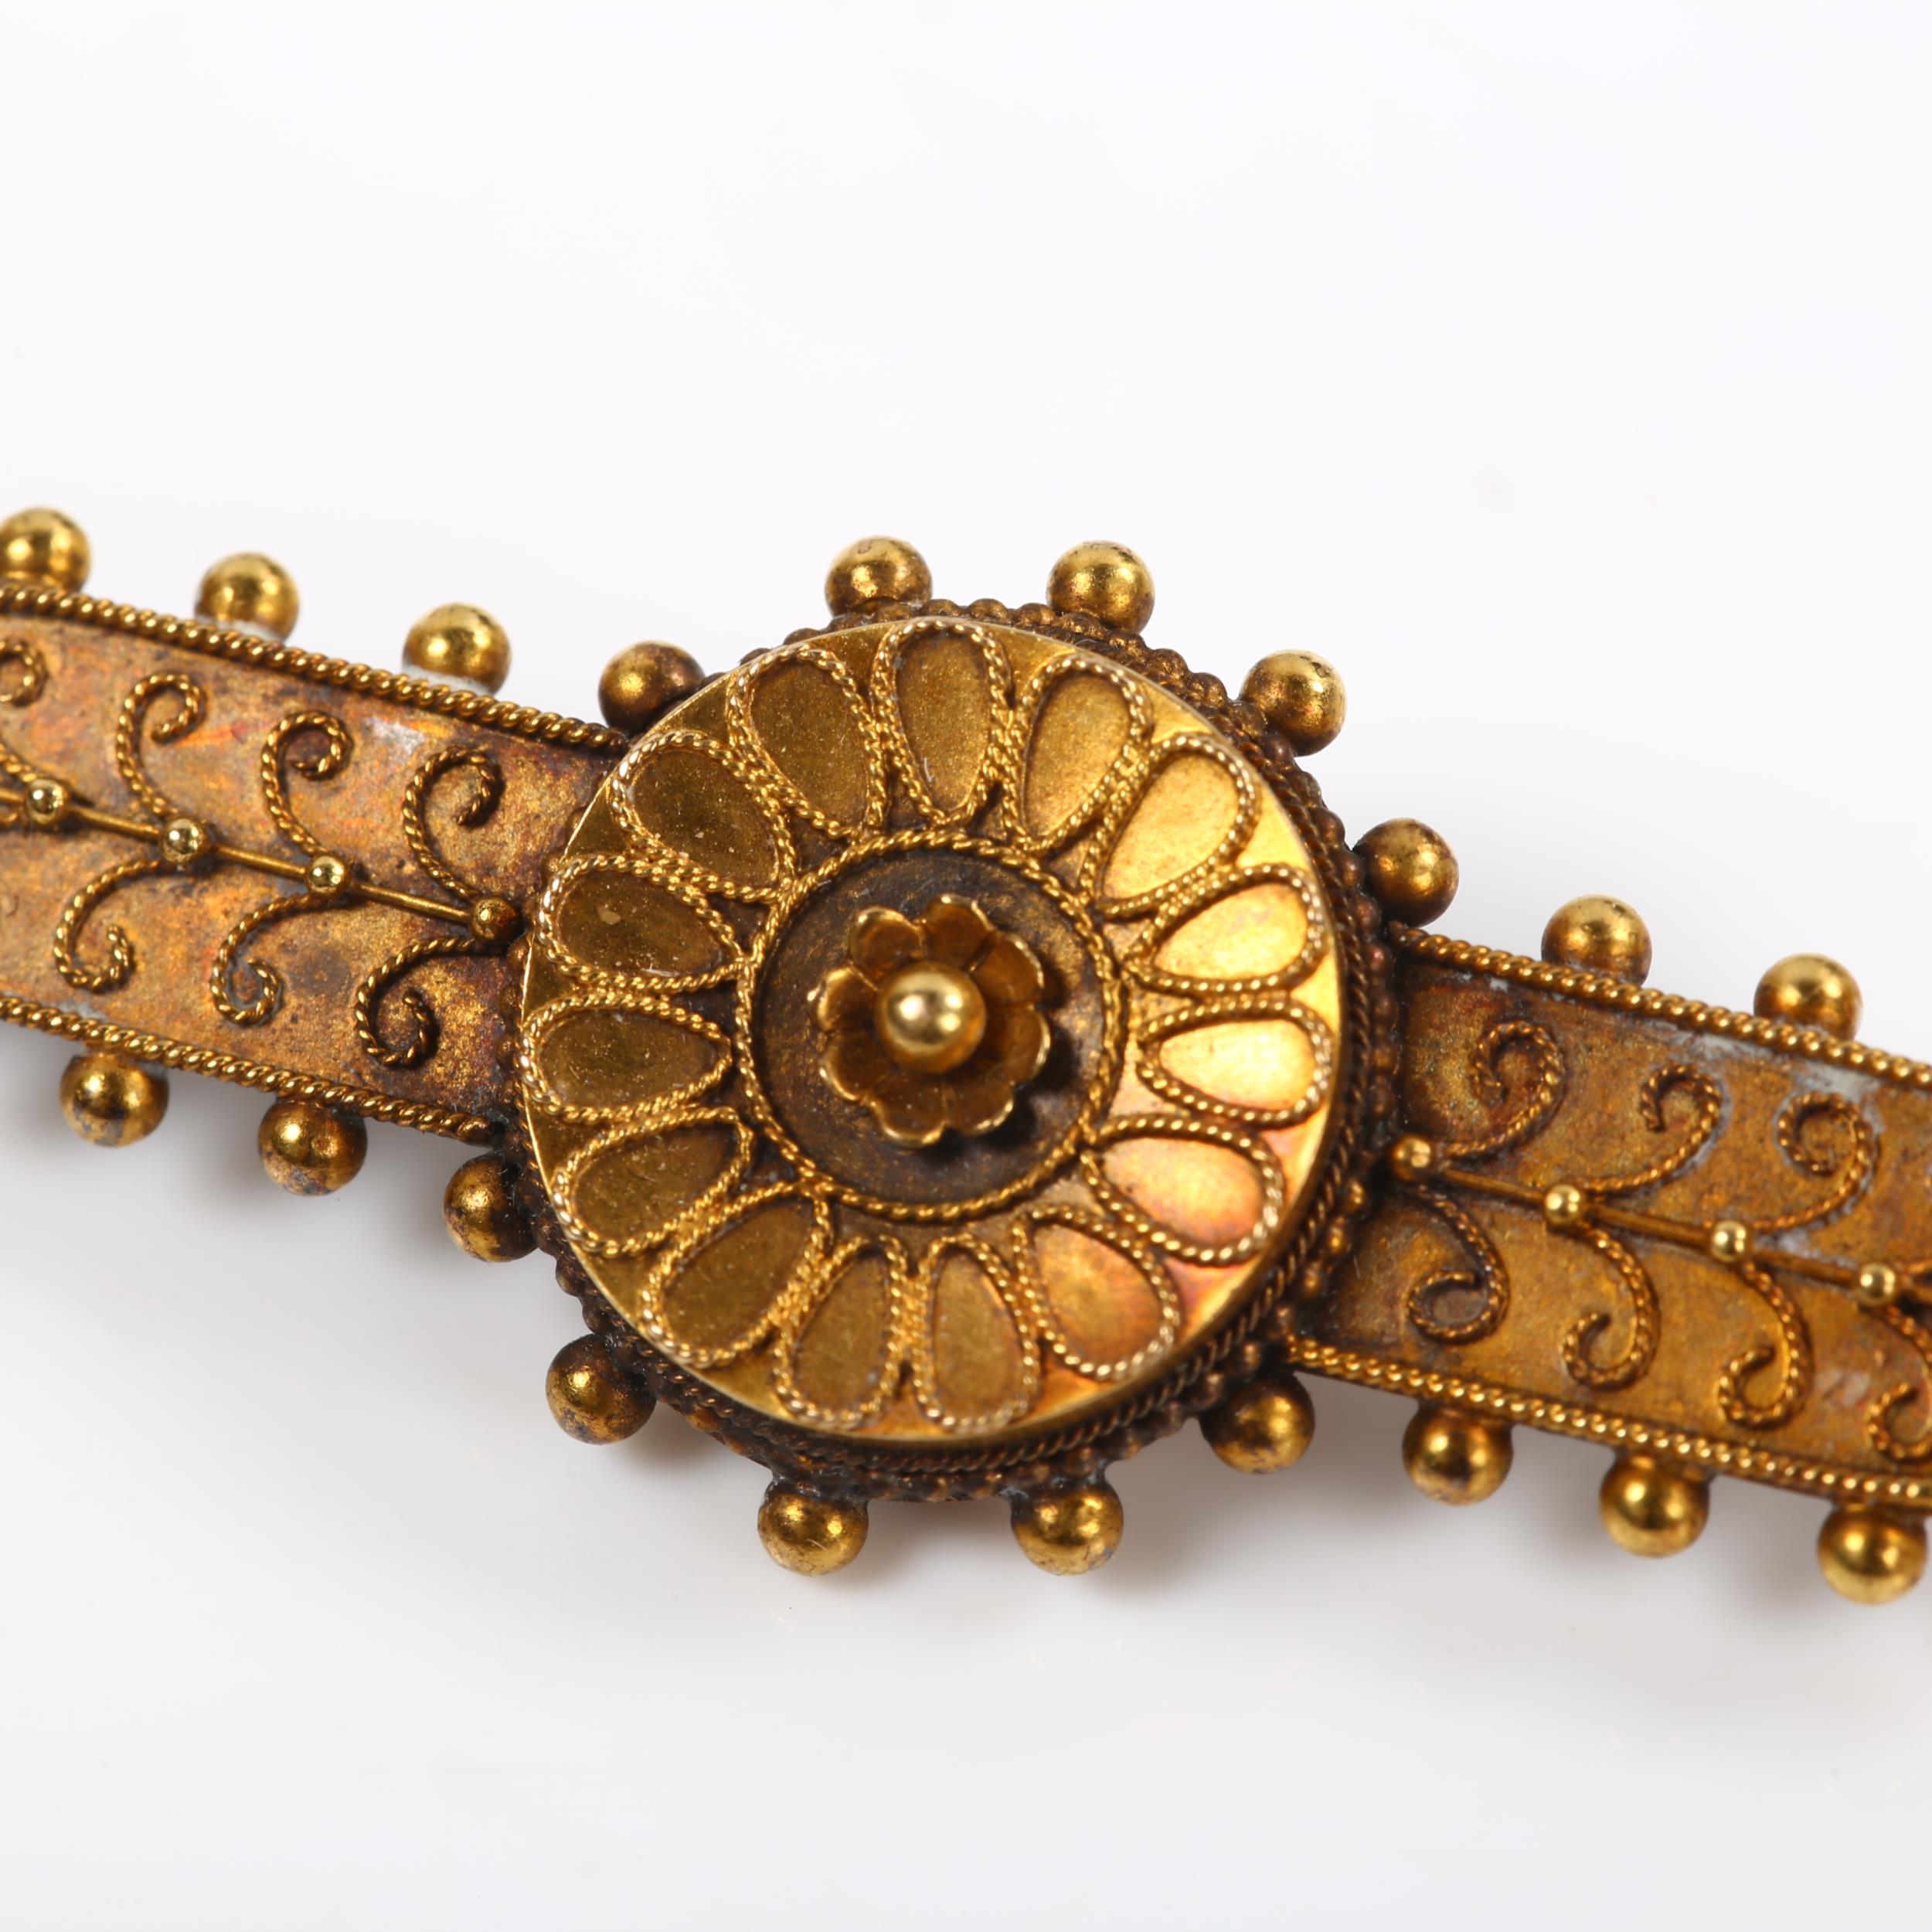 A Victorian 15ct gold Etruscan Revival brooch, with memorial inscription "In remembrance of 10 years - Image 3 of 4